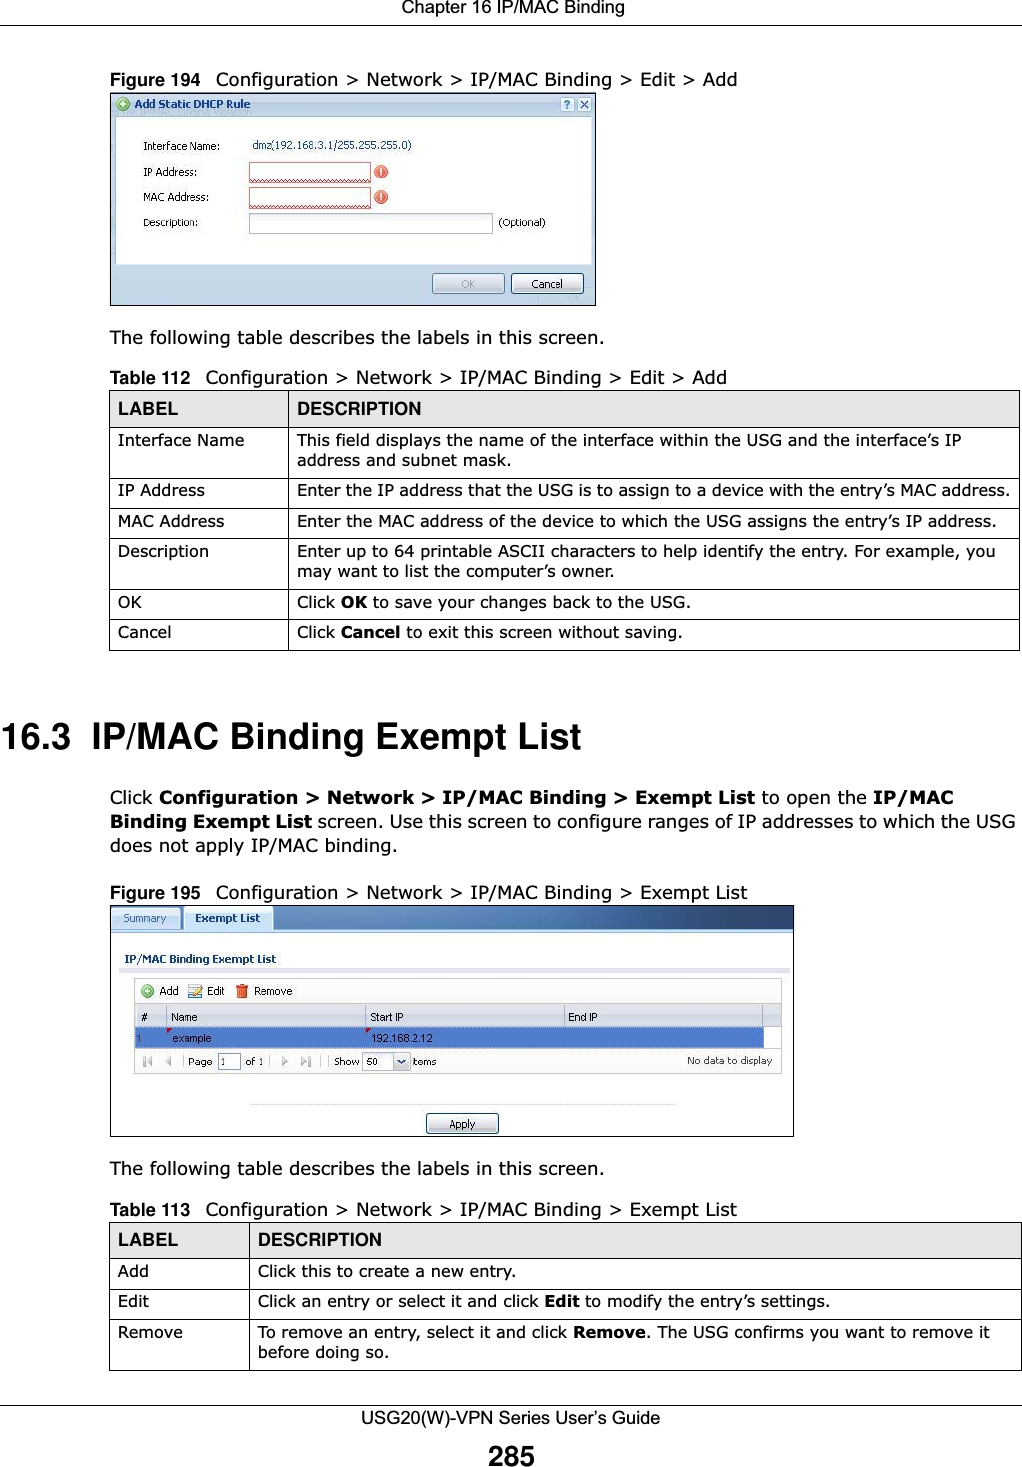  Chapter 16 IP/MAC BindingUSG20(W)-VPN Series User’s Guide285Figure 194   Configuration &gt; Network &gt; IP/MAC Binding &gt; Edit &gt; Add The following table describes the labels in this screen.  16.3  IP/MAC Binding Exempt ListClick Configuration &gt; Network &gt; IP/MAC Binding &gt; Exempt List to open the IP/MACBinding Exempt List screen. Use this screen to configure ranges of IP addresses to which the USG does not apply IP/MAC binding. Figure 195   Configuration &gt; Network &gt; IP/MAC Binding &gt; Exempt List The following table describes the labels in this screen.Table 112   Configuration &gt; Network &gt; IP/MAC Binding &gt; Edit &gt; Add LABEL DESCRIPTIONInterface Name This field displays the name of the interface within the USG and the interface’s IP address and subnet mask.IP Address Enter the IP address that the USG is to assign to a device with the entry’s MAC address.MAC Address Enter the MAC address of the device to which the USG assigns the entry’s IP address.Description Enter up to 64 printable ASCII characters to help identify the entry. For example, you may want to list the computer’s owner.OK Click OK to save your changes back to the USG.Cancel Click Cancel to exit this screen without saving.Table 113   Configuration &gt; Network &gt; IP/MAC Binding &gt; Exempt List LABEL DESCRIPTIONAdd Click this to create a new entry.Edit Click an entry or select it and click Edit to modify the entry’s settings. Remove To remove an entry, select it and click Remove. The USG confirms you want to remove it before doing so.